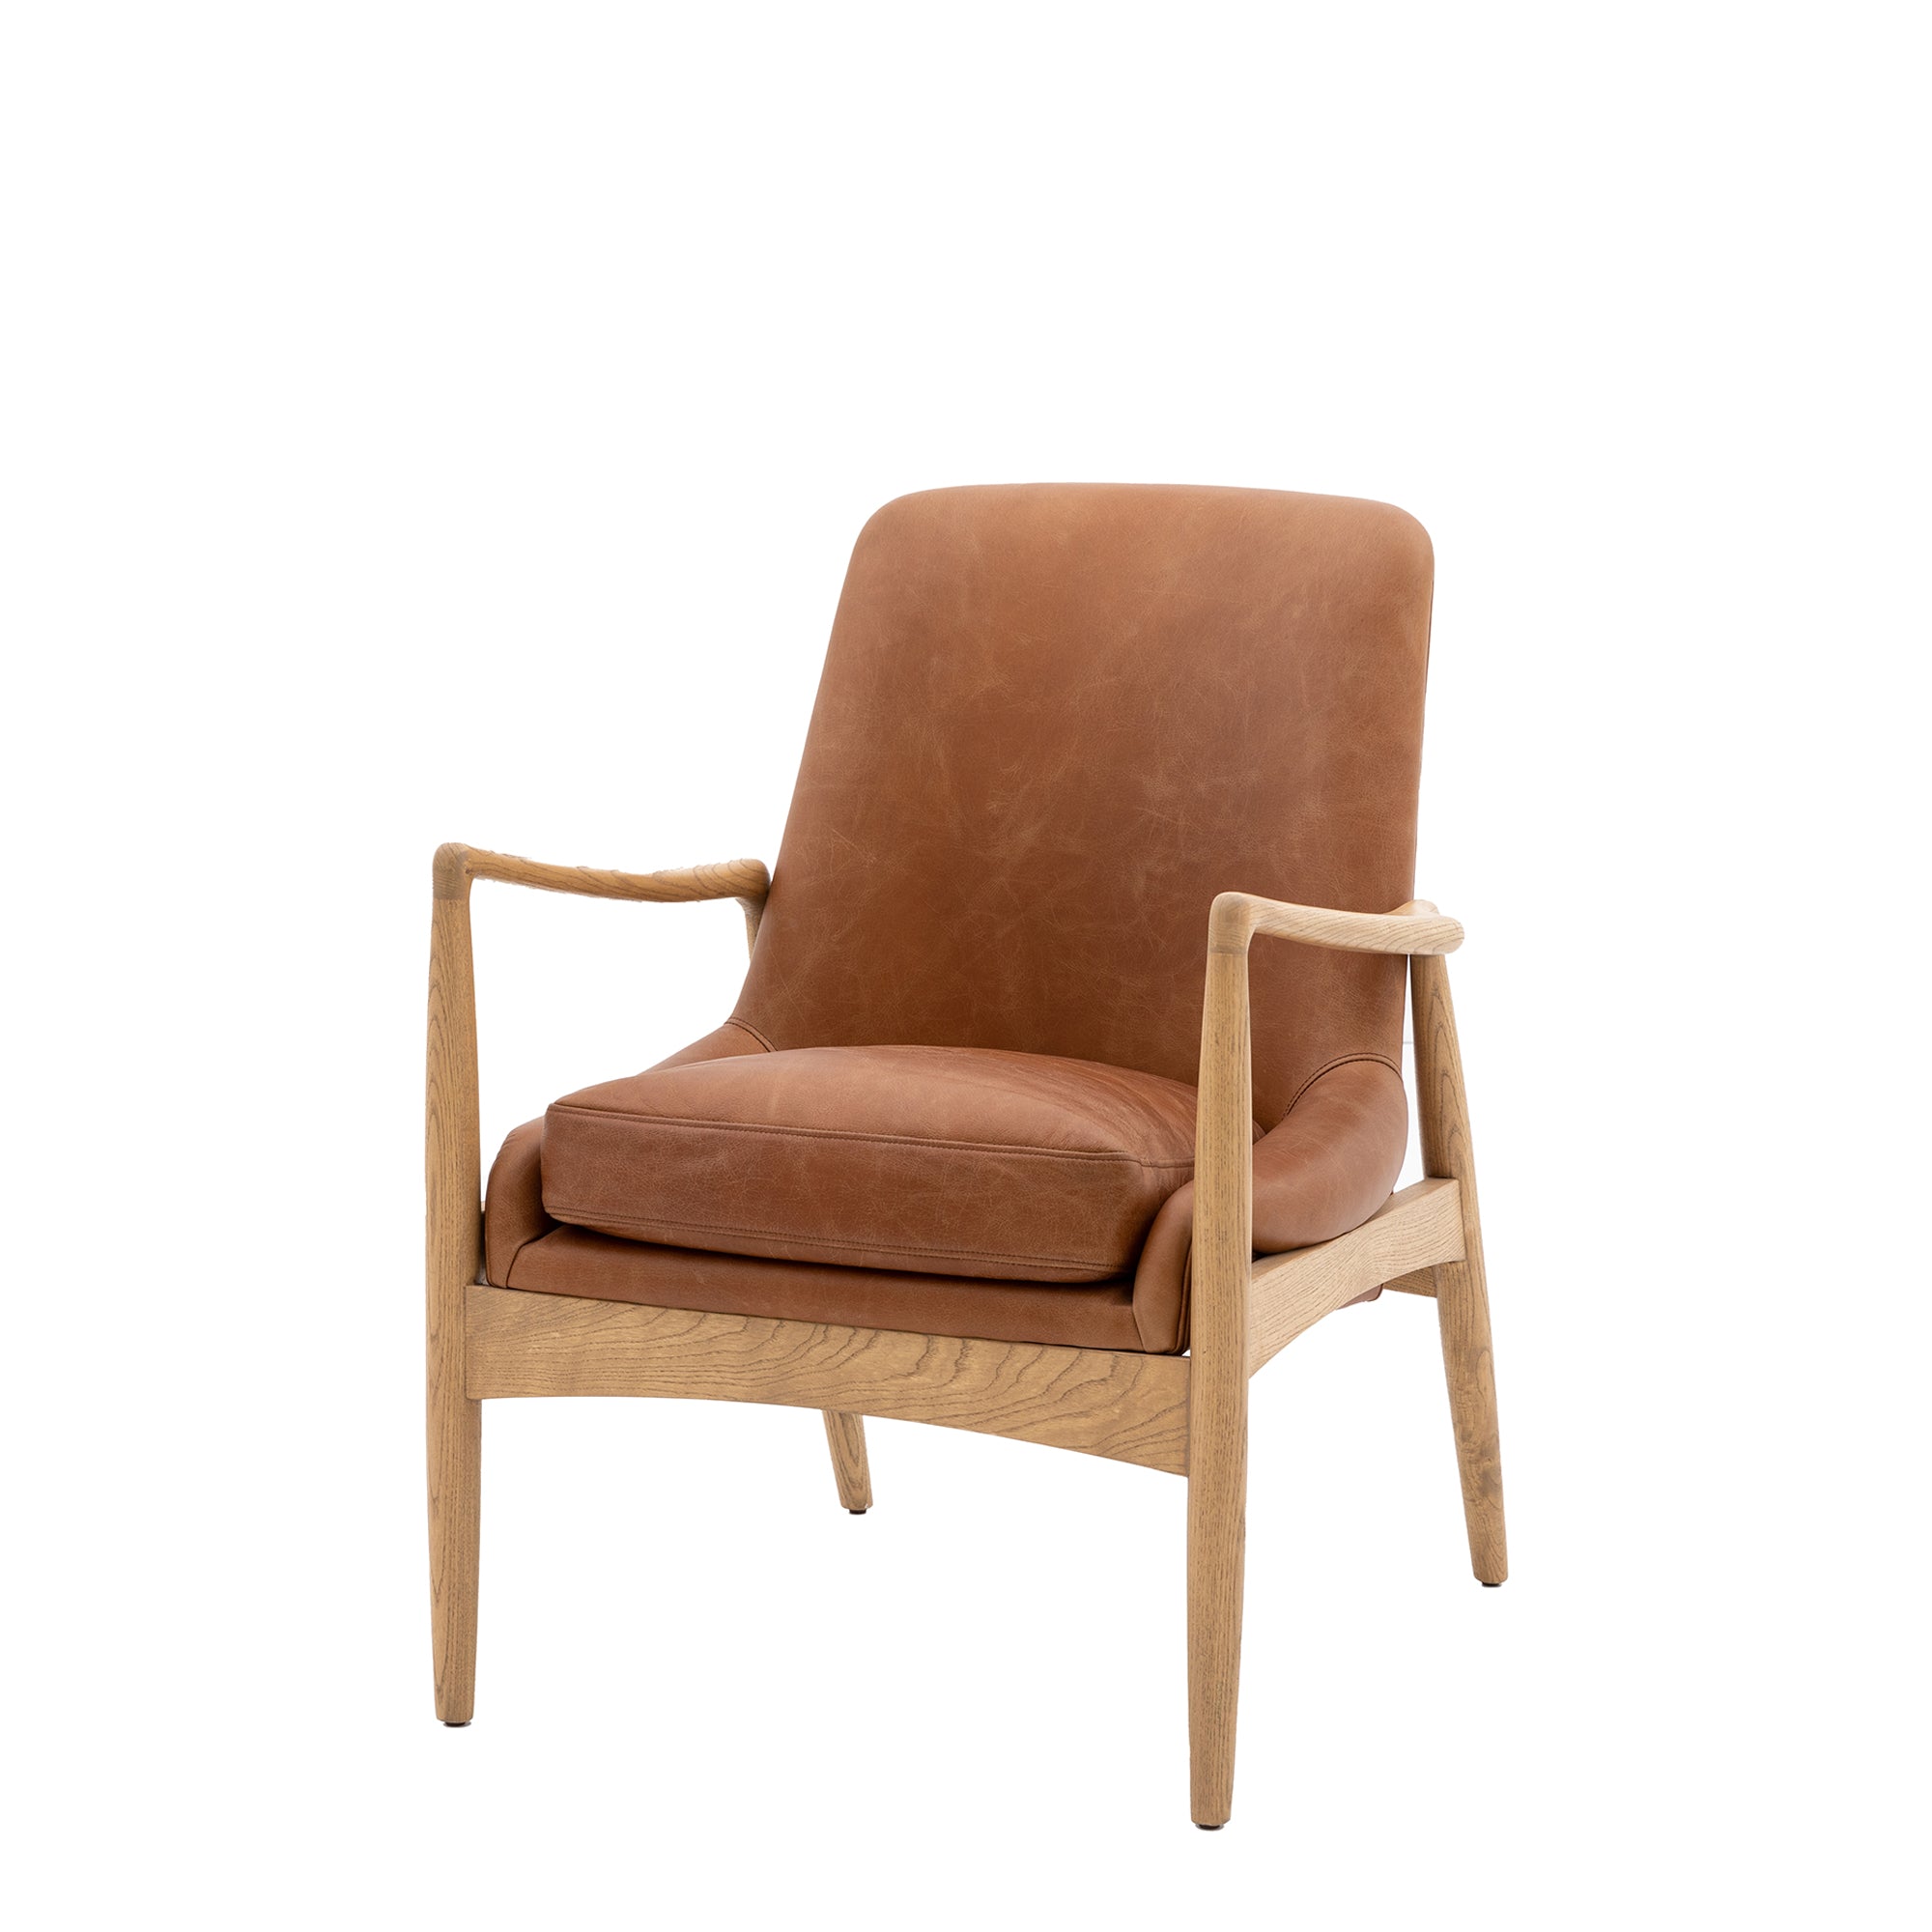 Theo - Chair In Leather Brown